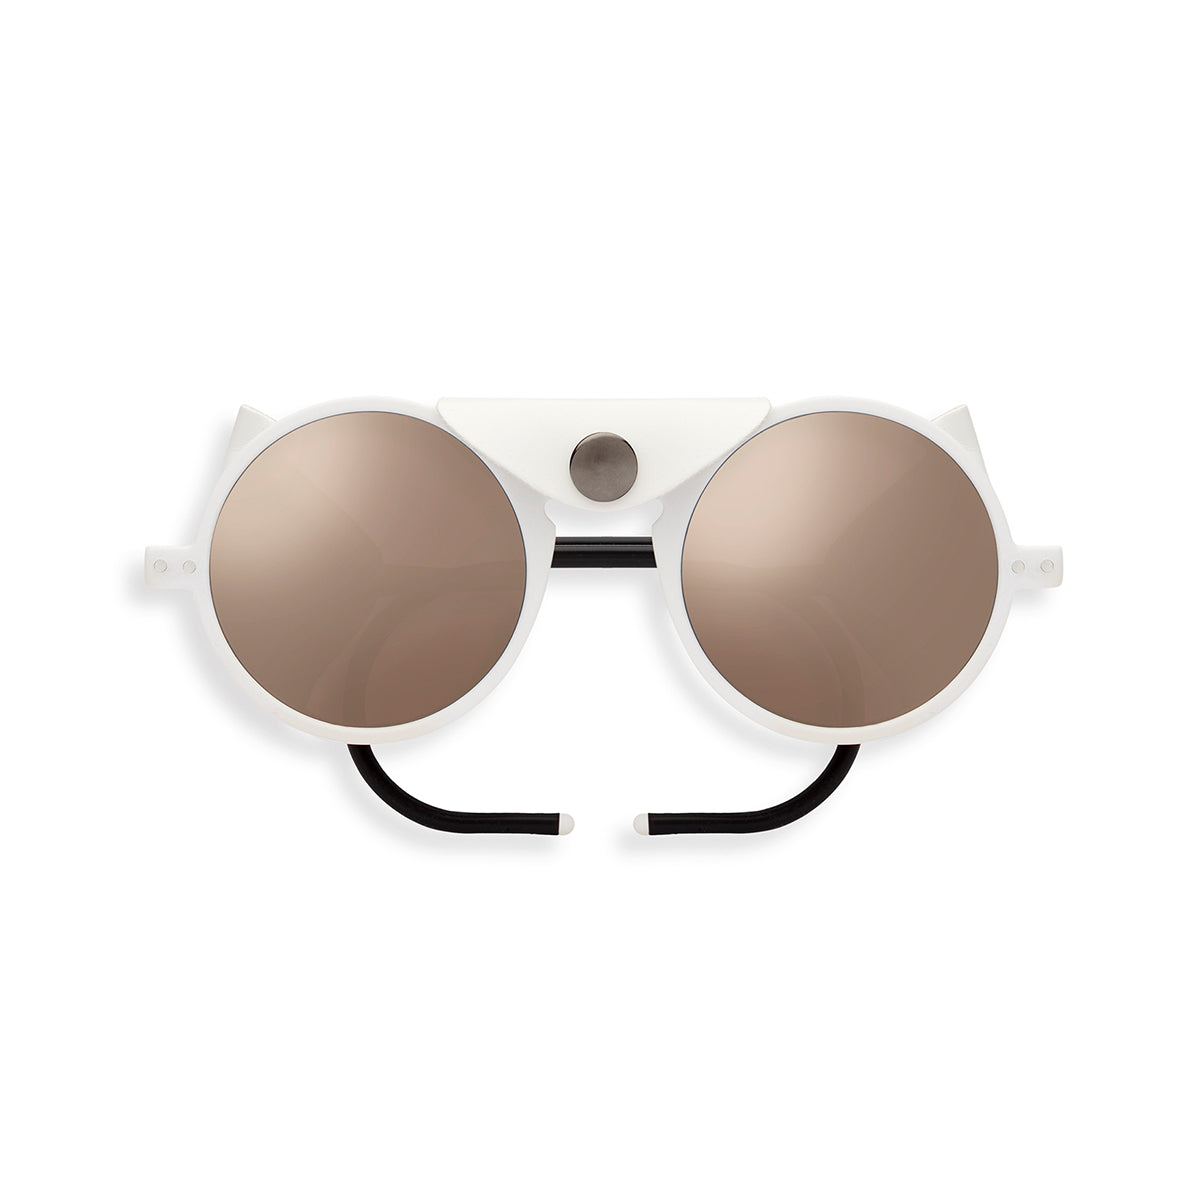 Image of white framed folded sunglasses, with with black arms & a leatherette flap across the bridge of the glasses & attached with a silver press stud. Set against a white background.